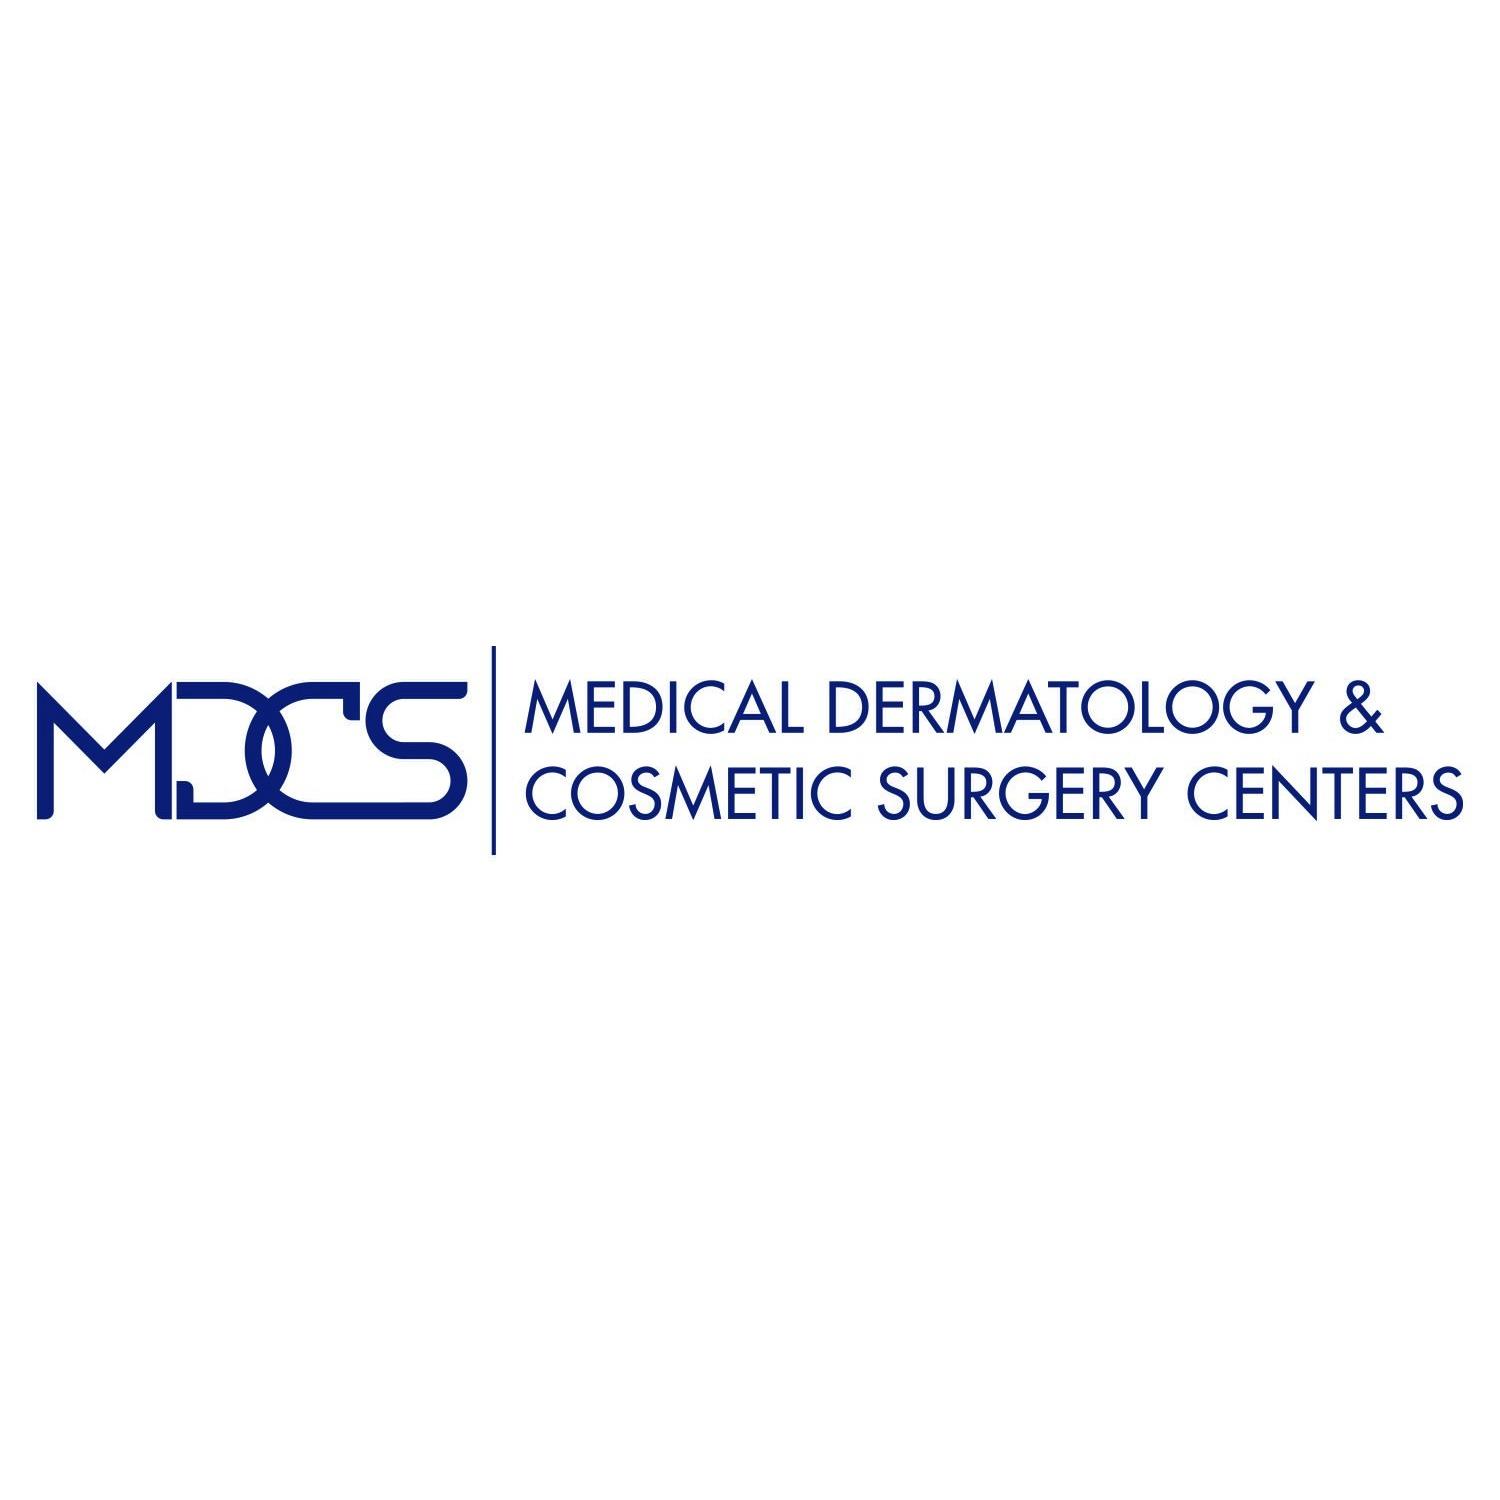 MDCS: Medical Dermatology & Cosmetic Surgery Centers ...